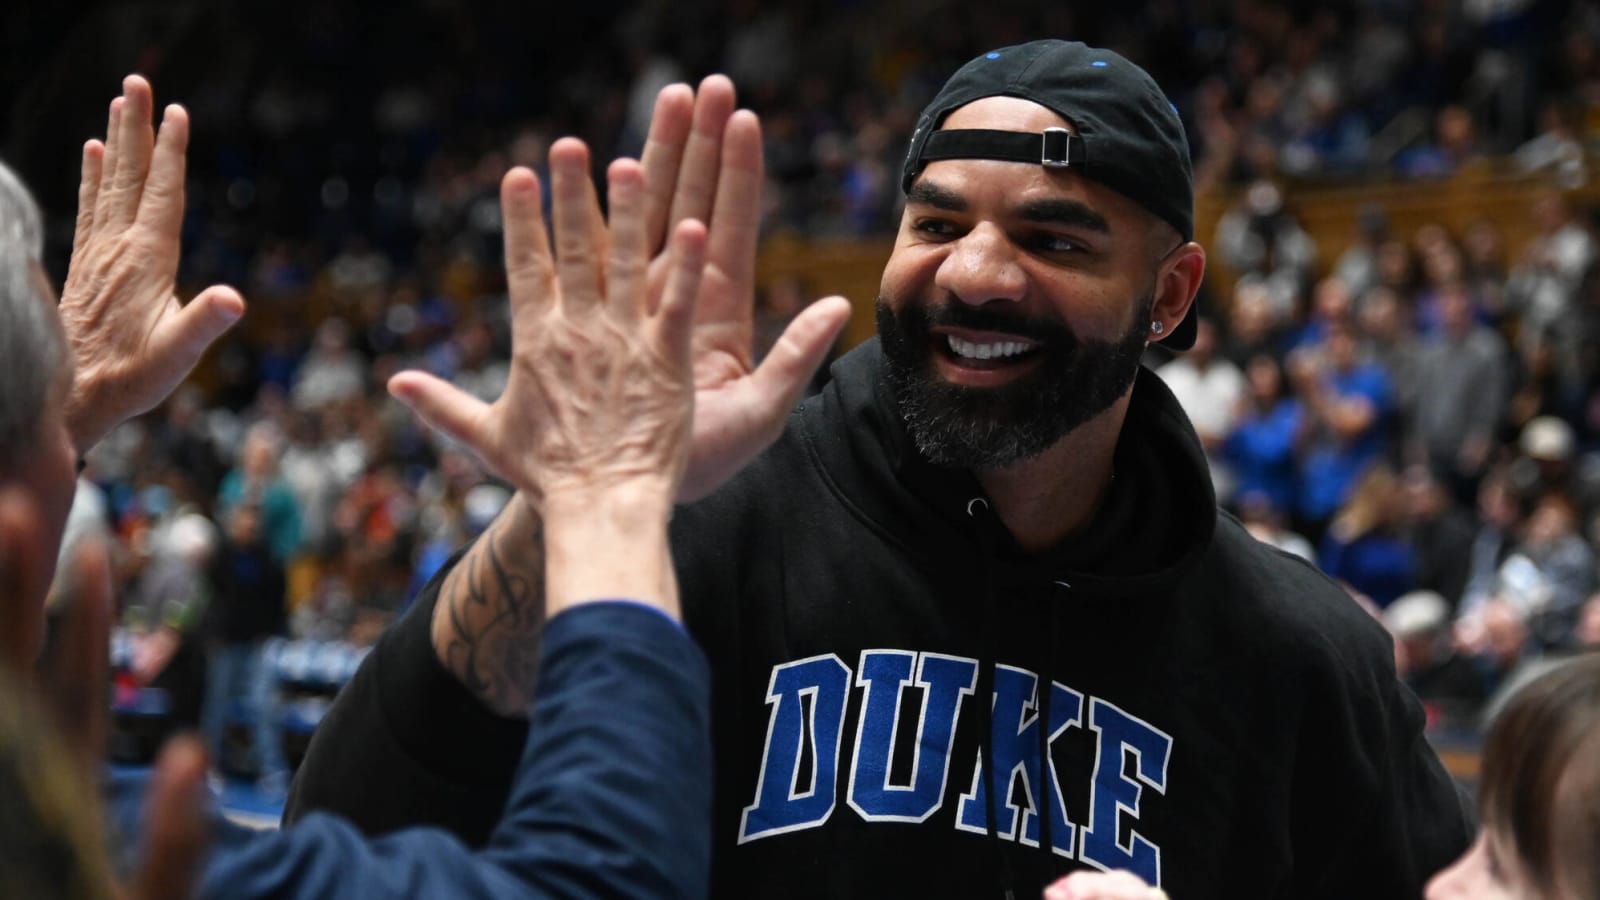 Carlos Boozer’s 15-year-old son is already ridiculously tall